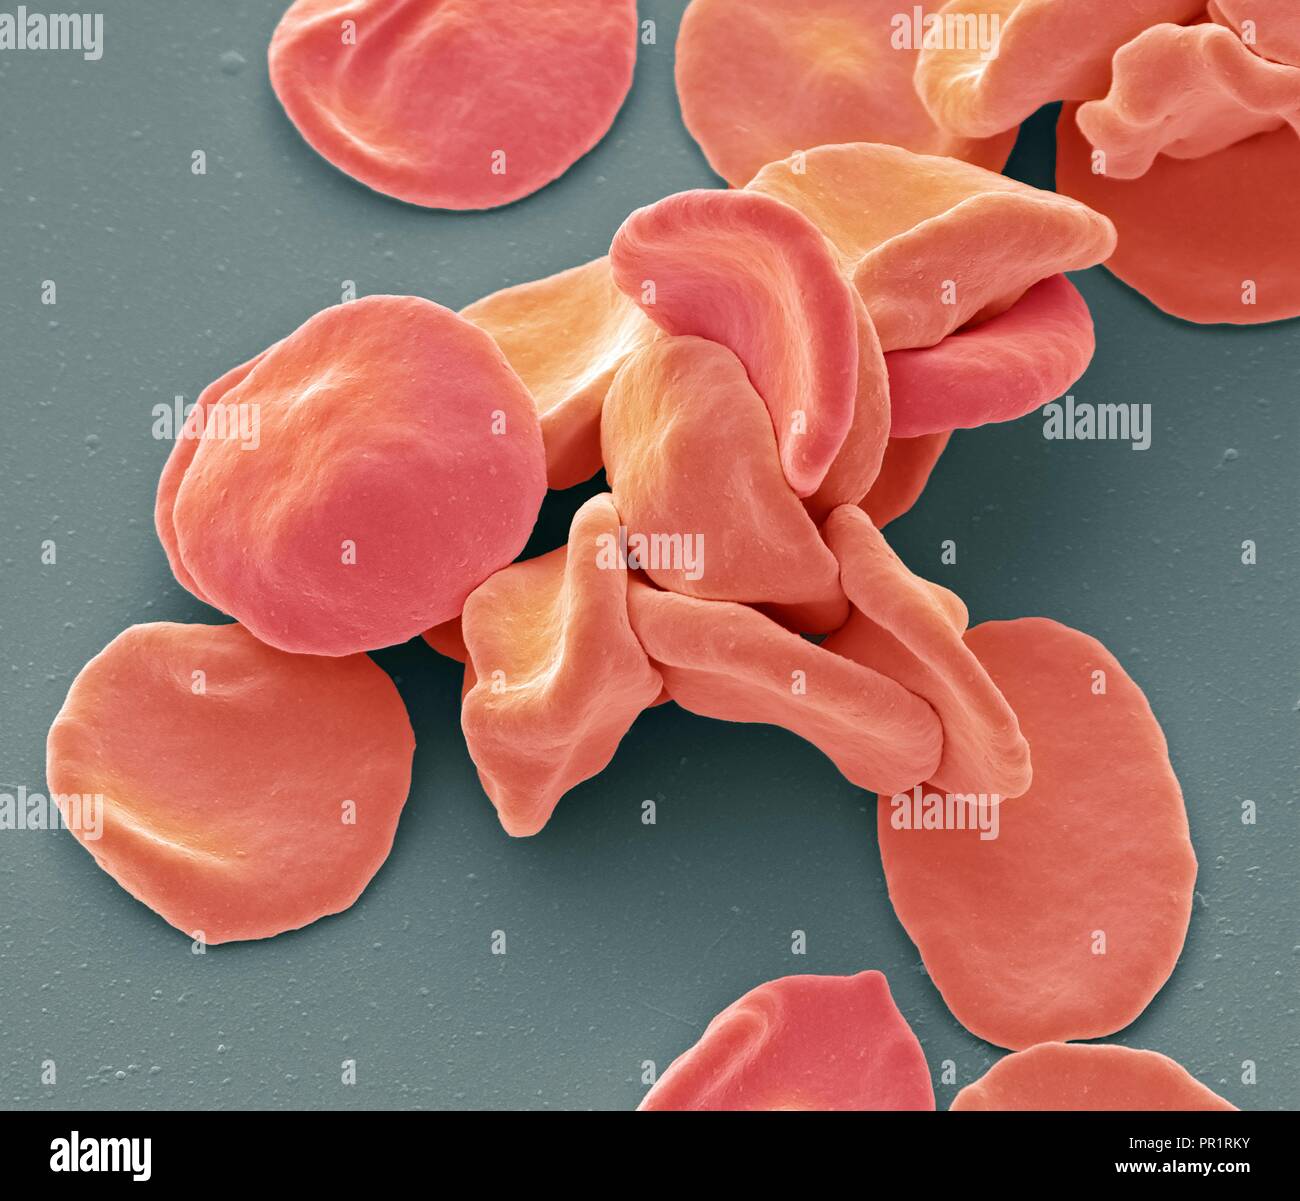 Coloured scanning electron micrograph (SEM) of red blood cells (RBCs,  erythrocytes). Red blood cells are biconcave, disc-shaped cells that  transport oxygen from the lungs to body cells. They circulate in the blood